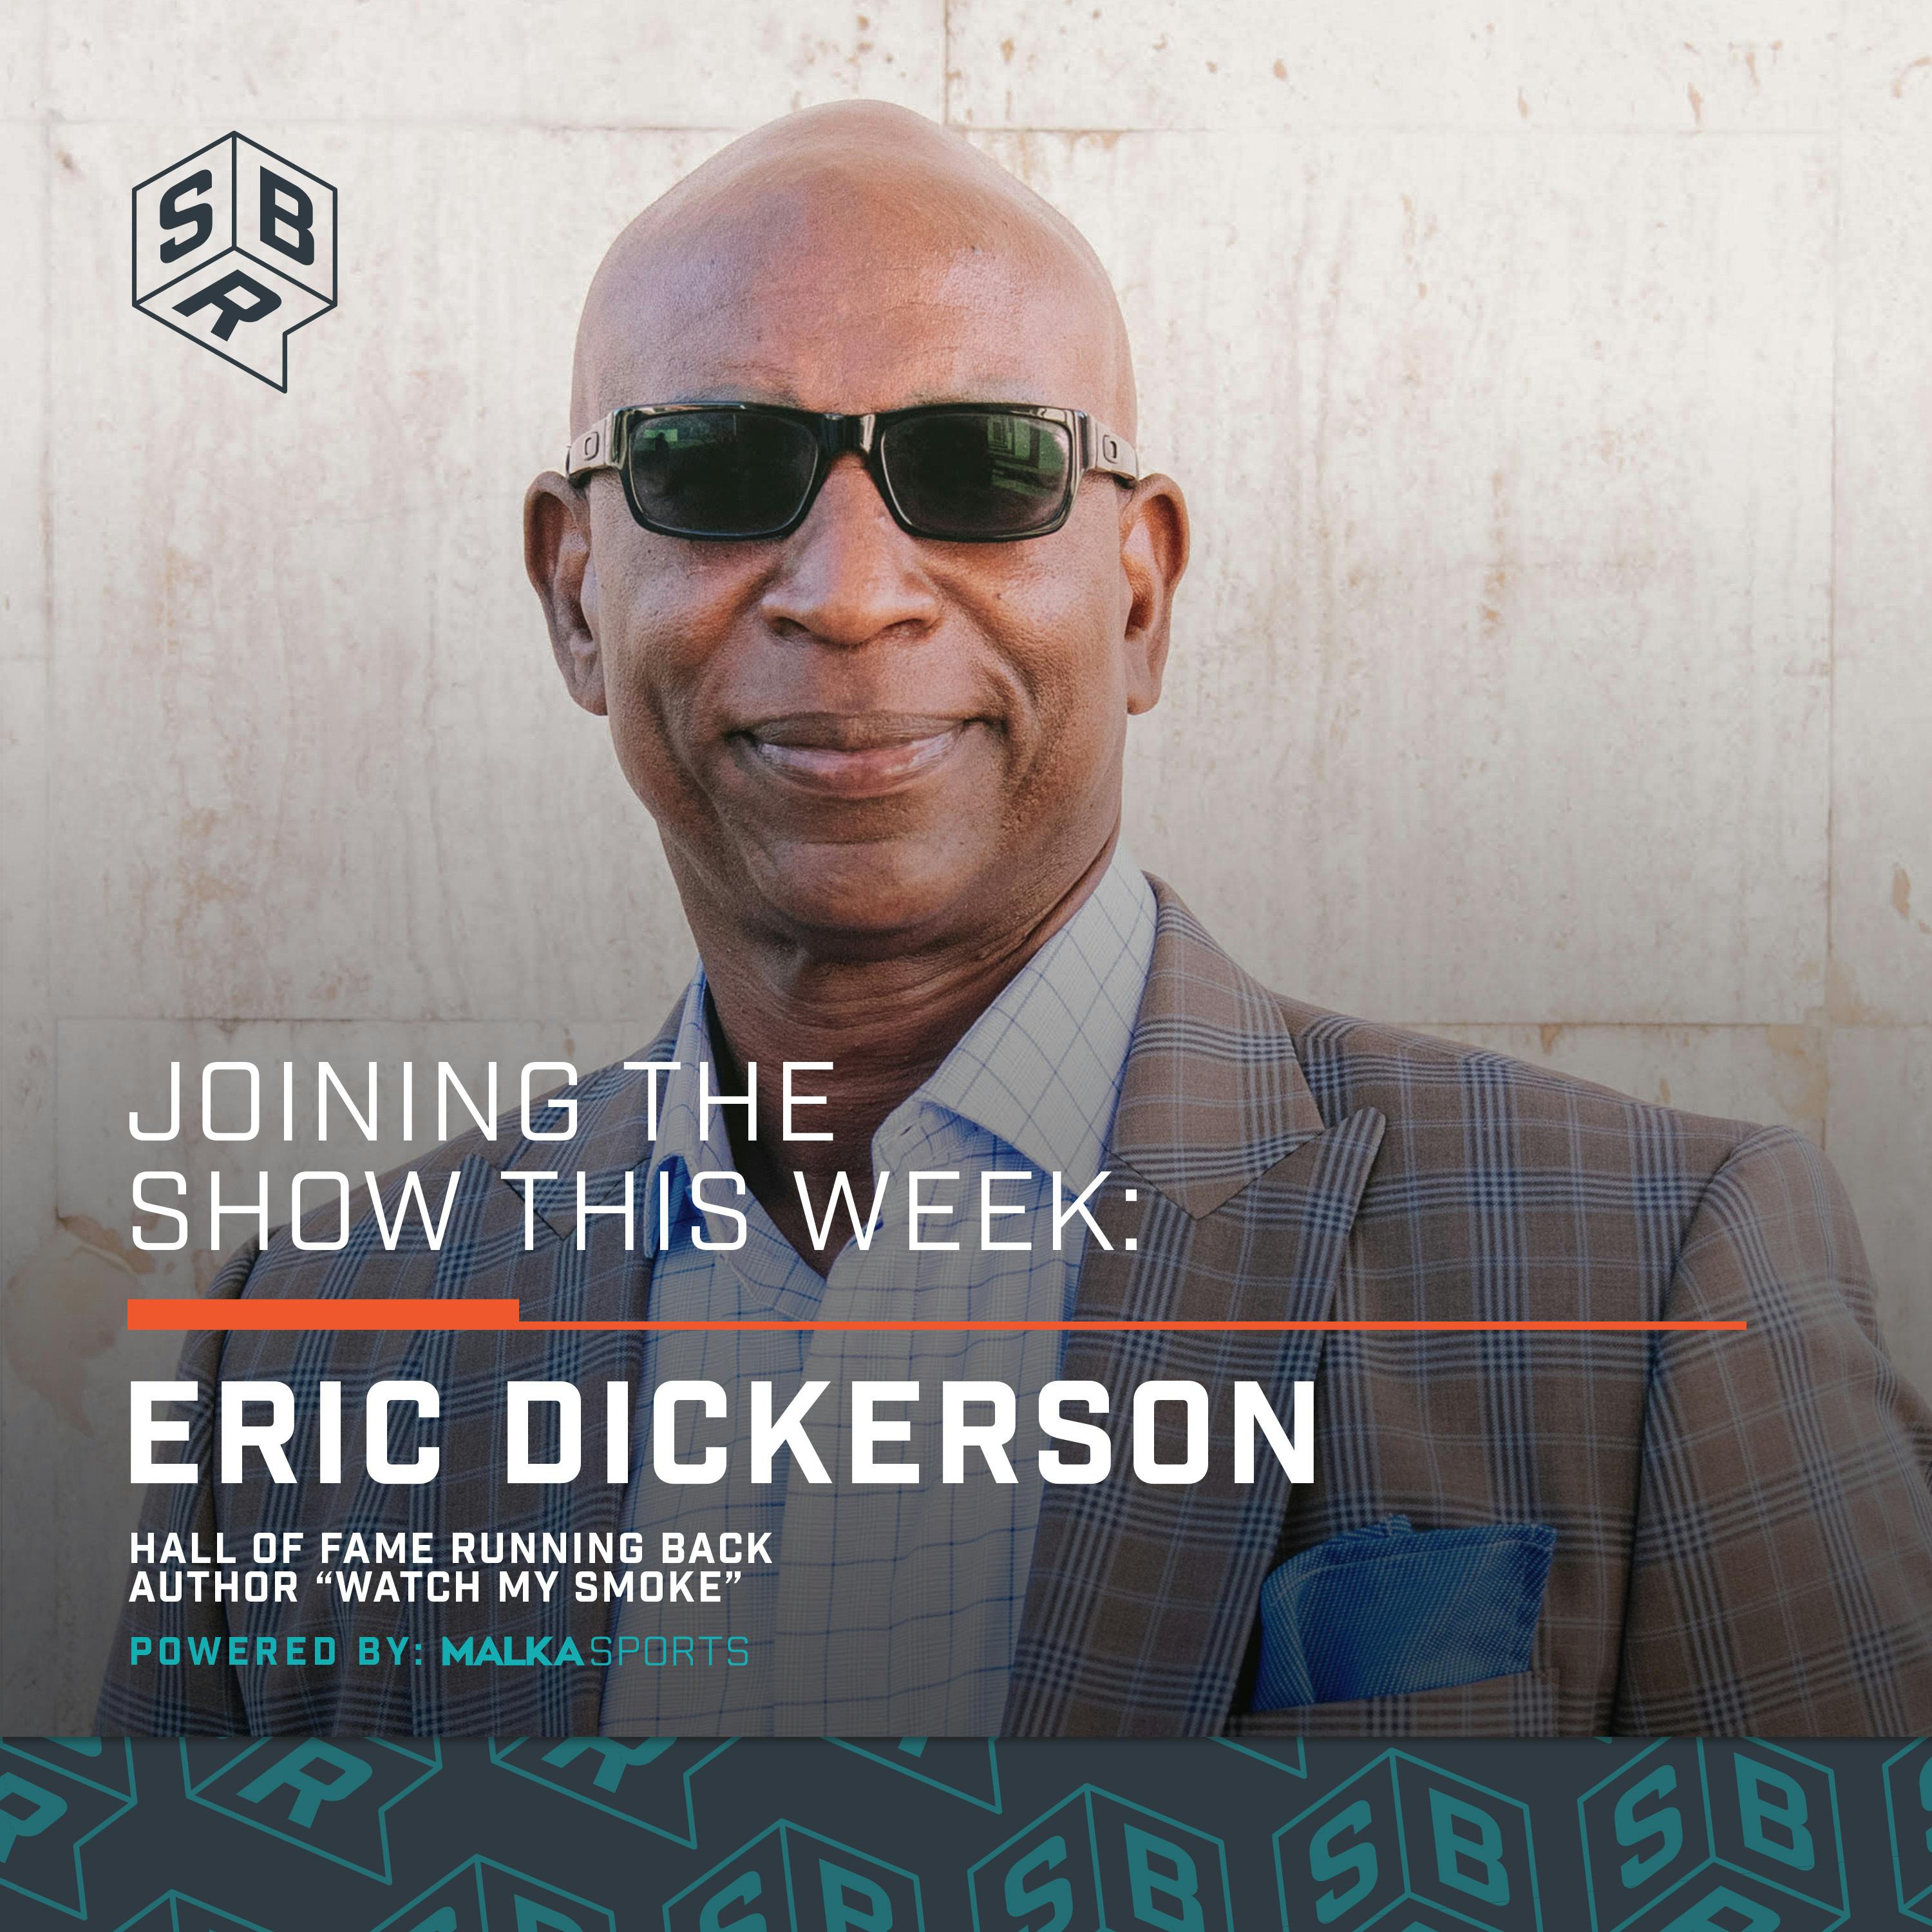 Eric Dickerson (@EricDickerson) - NFL Hall of Fame Running Back